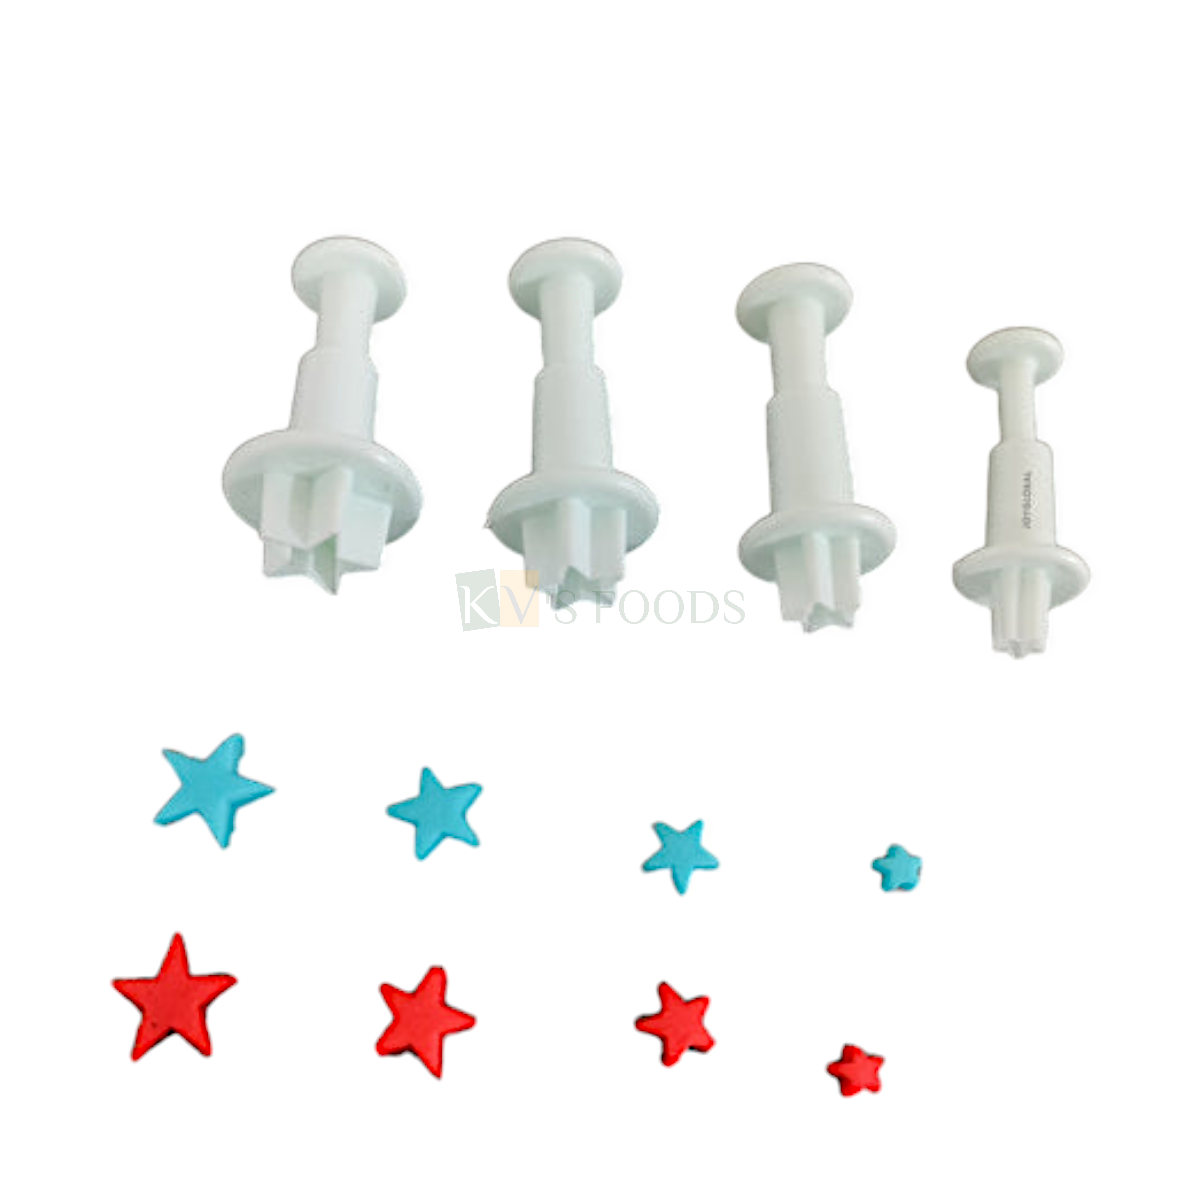 4 PCS White Star Shapes Fondant Plunger Cutters Stamps, Molds, Embossing Spring Mold Printed Presses Impression Biscuit Chocolate Cookies Christmas Birthday Wedding Anniversary Cakes Decorations